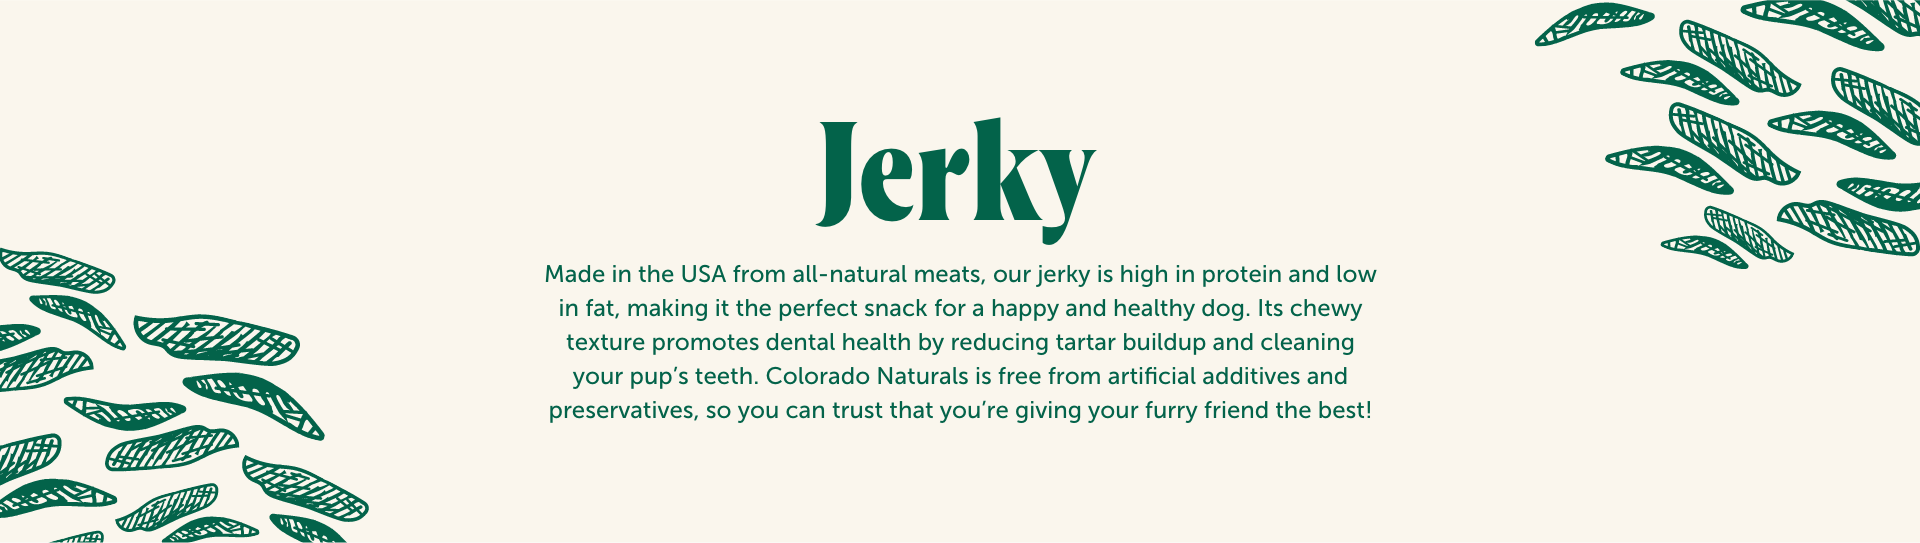 Colorado Pet Treats Dog Jerky Pet Treat Page Banner. Colorado Pet Treats - All-Natural, All-American Dog Jerky, Jerky Chips, and Bones - Treat your furry friend to our delicious and healthy pet treats made with only the finest ingredients sourced in the USA. Made in the USA from all-natural meats, our jerky is high in protein and low in fat, making it the perfect snack for a happy and healthy dog. Its chewy texture promotes dental health by reducing tartar buildup and cleaning your pup's teeth. Colorado Naturals is free from artificial additives and preservatives, so you can trust that you're giving your furry friend the best!